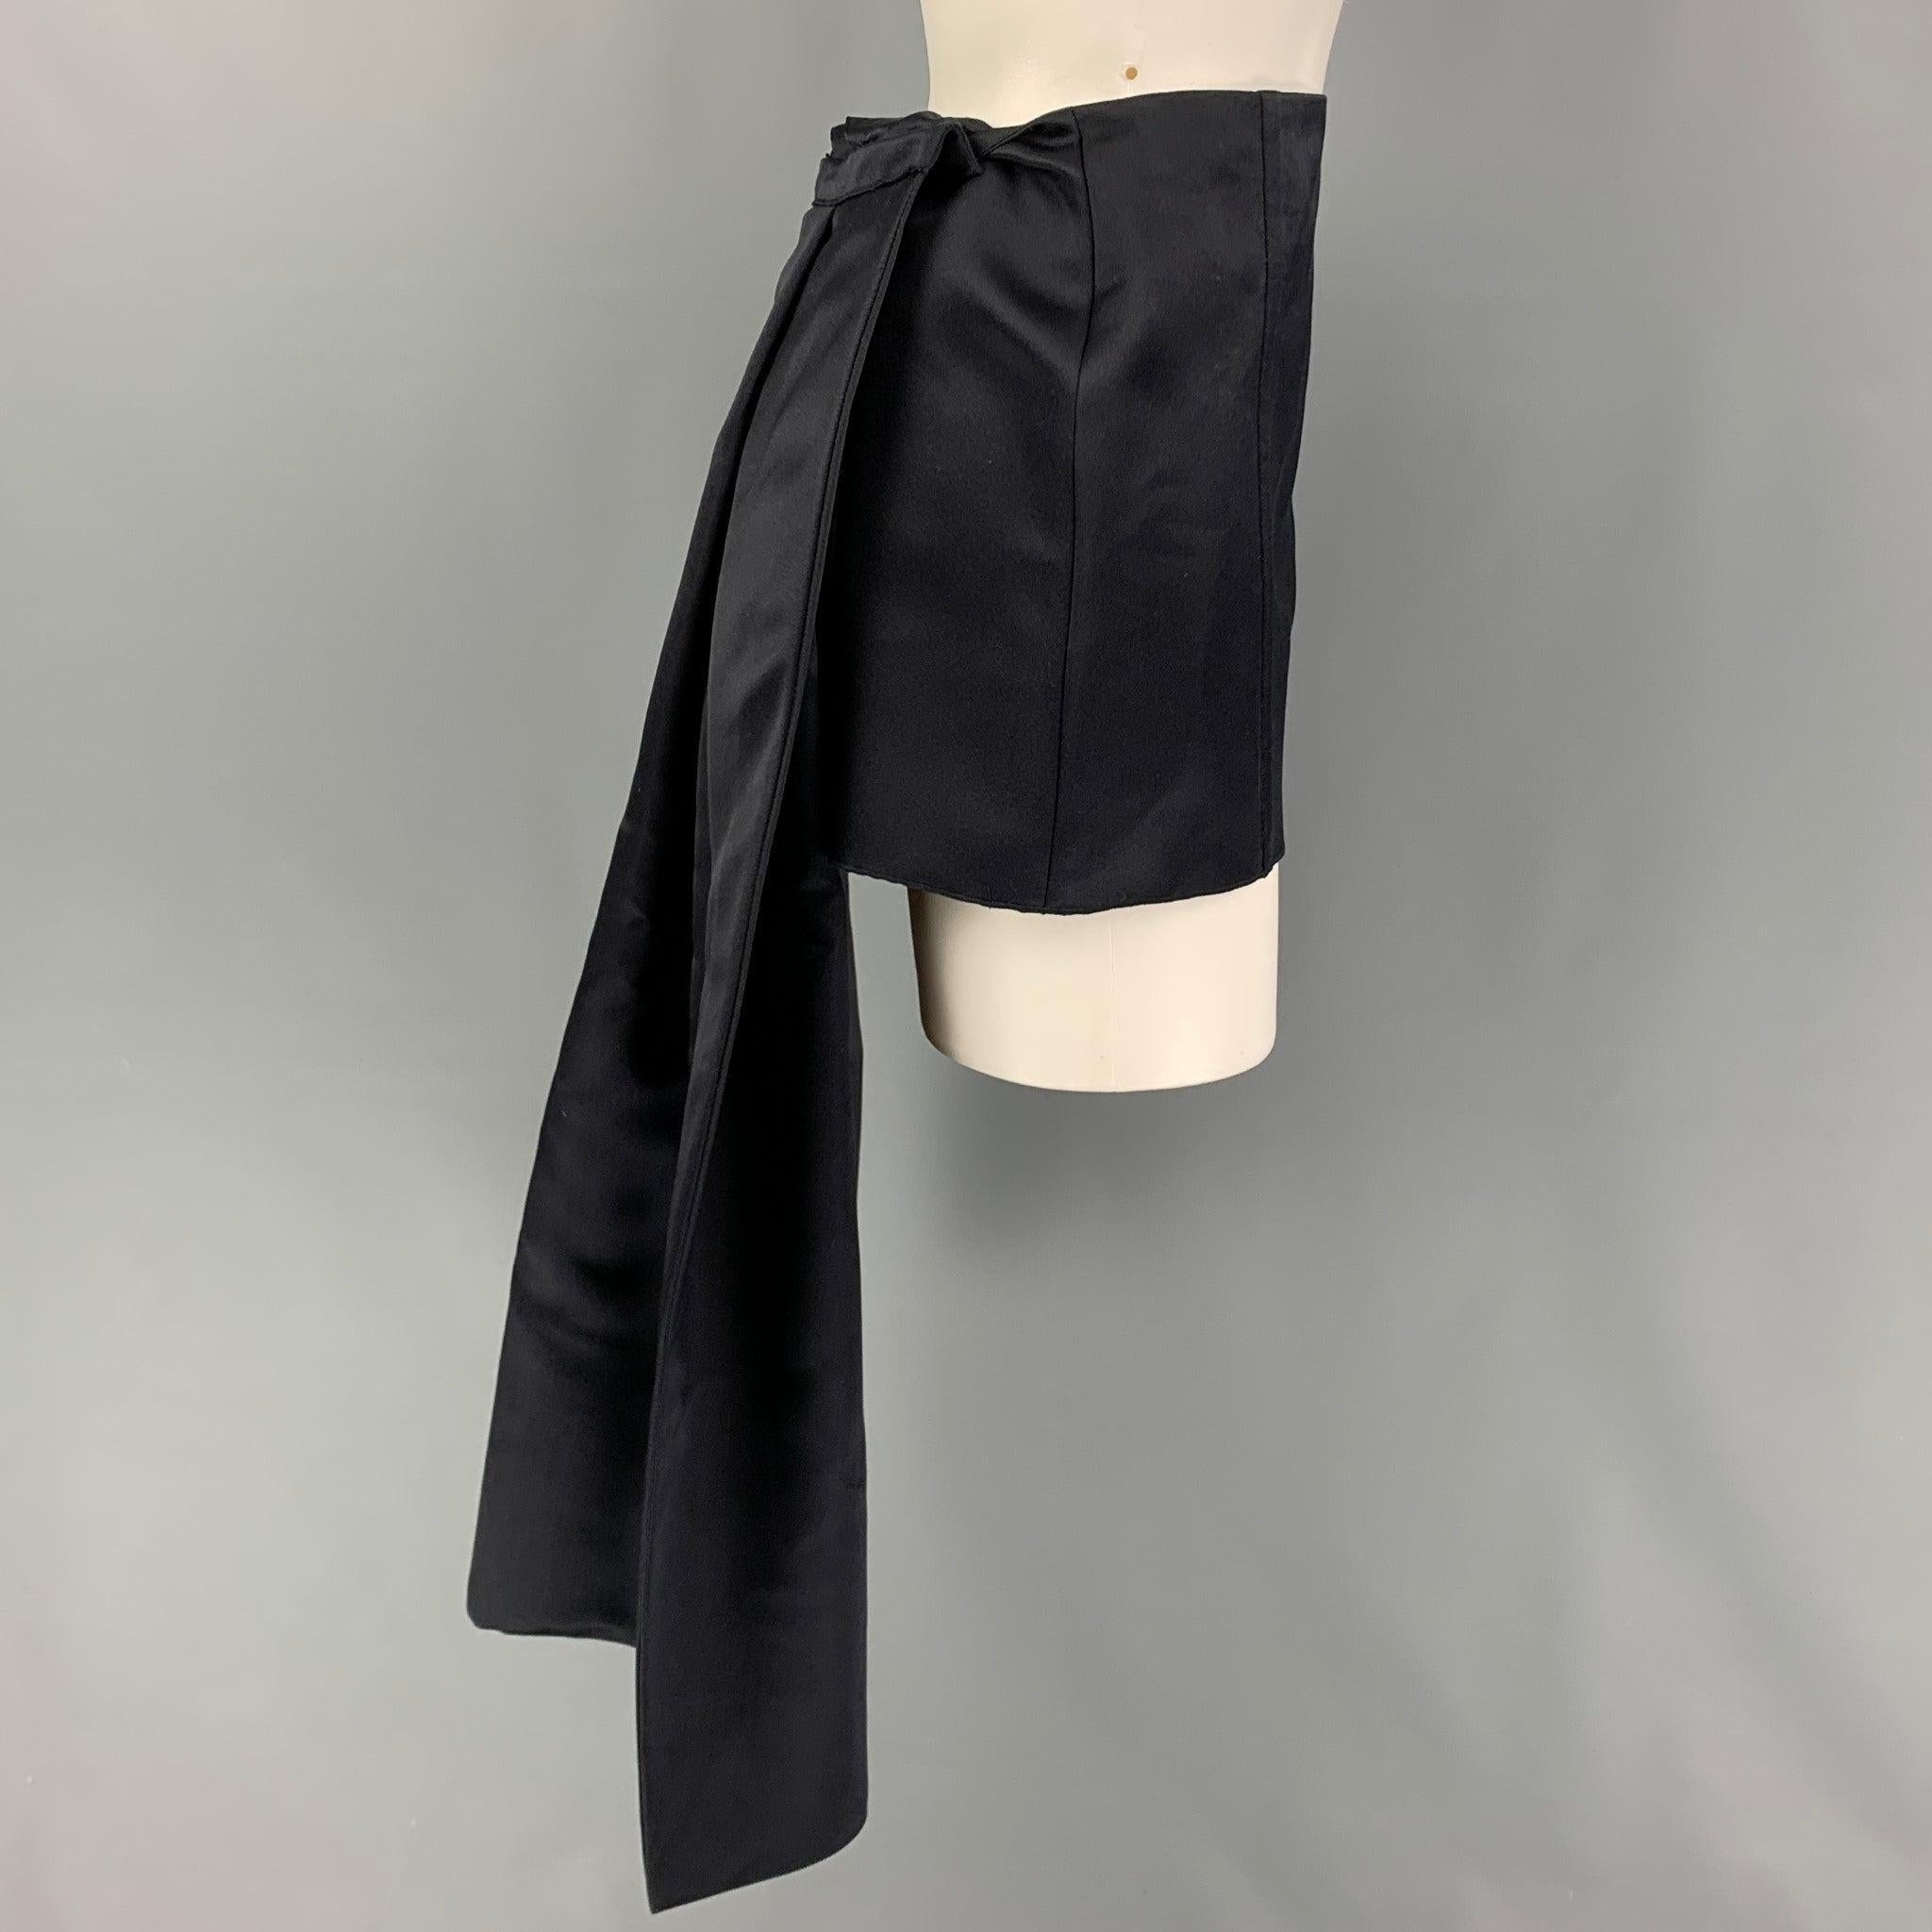 PRADA Spring-Summer 2022 mini skirt comes in a navy satin silk featuring a detachable train design and side zipper closure. Made in italy.
Very Good
Pre-Owned Condition. 

Marked:   38 

Measurements: 
  Waist: 29 inches  Hip: 36 inches  Skirt